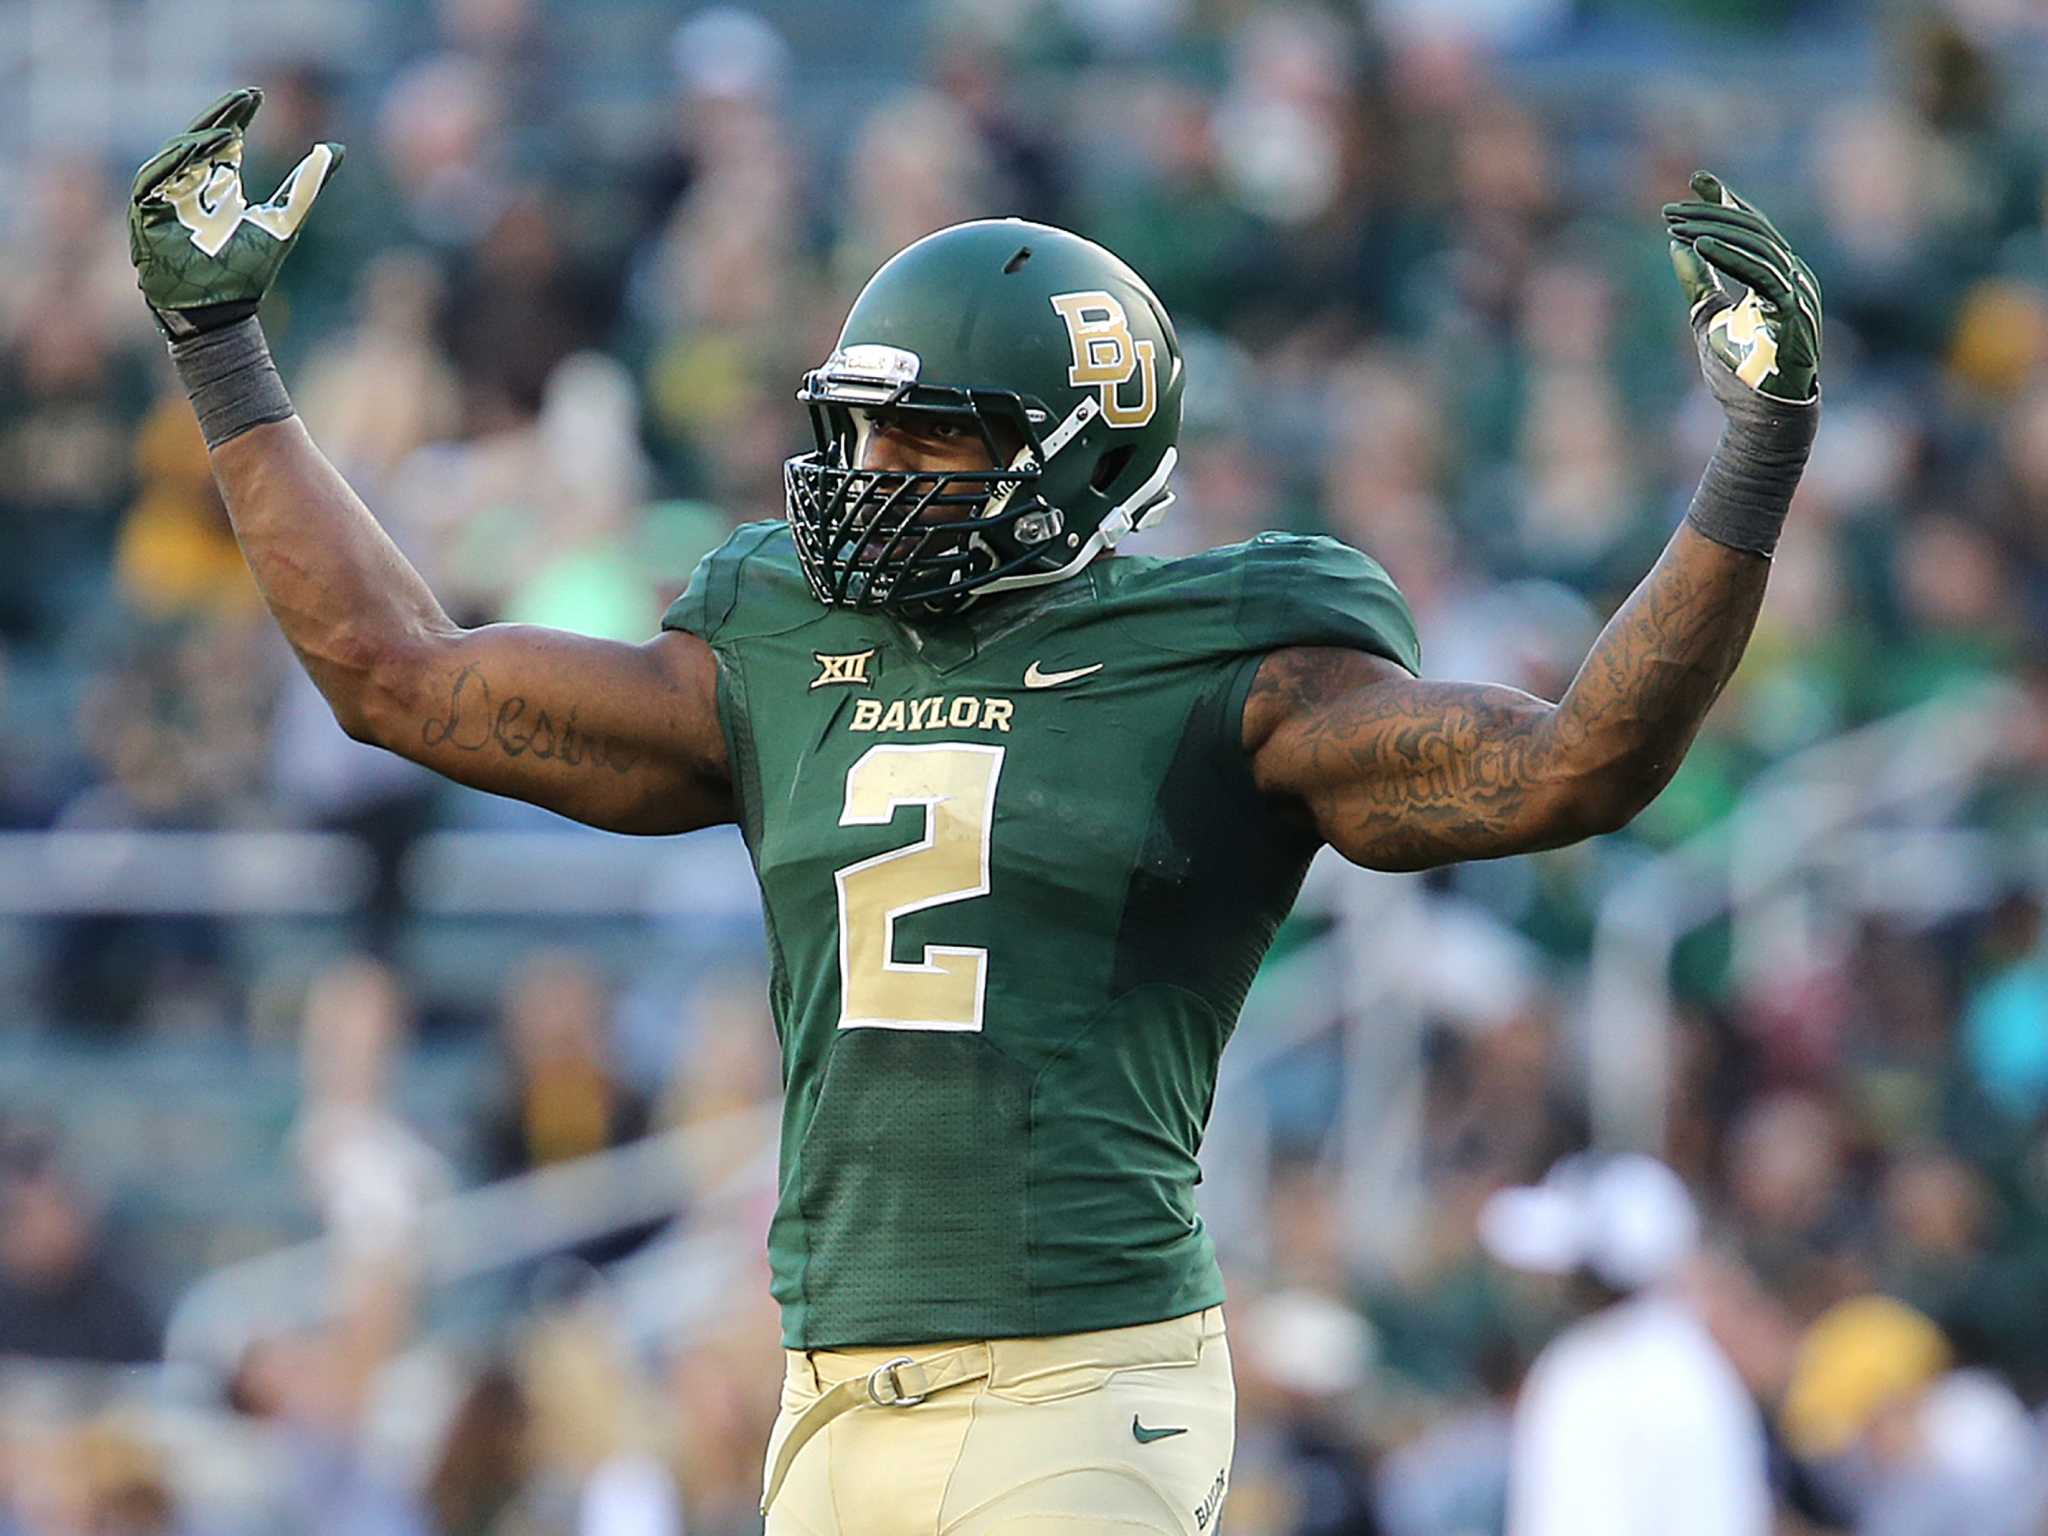 Former Baylor Star Shawn Oakman Indicted On Sexual Assault Charge